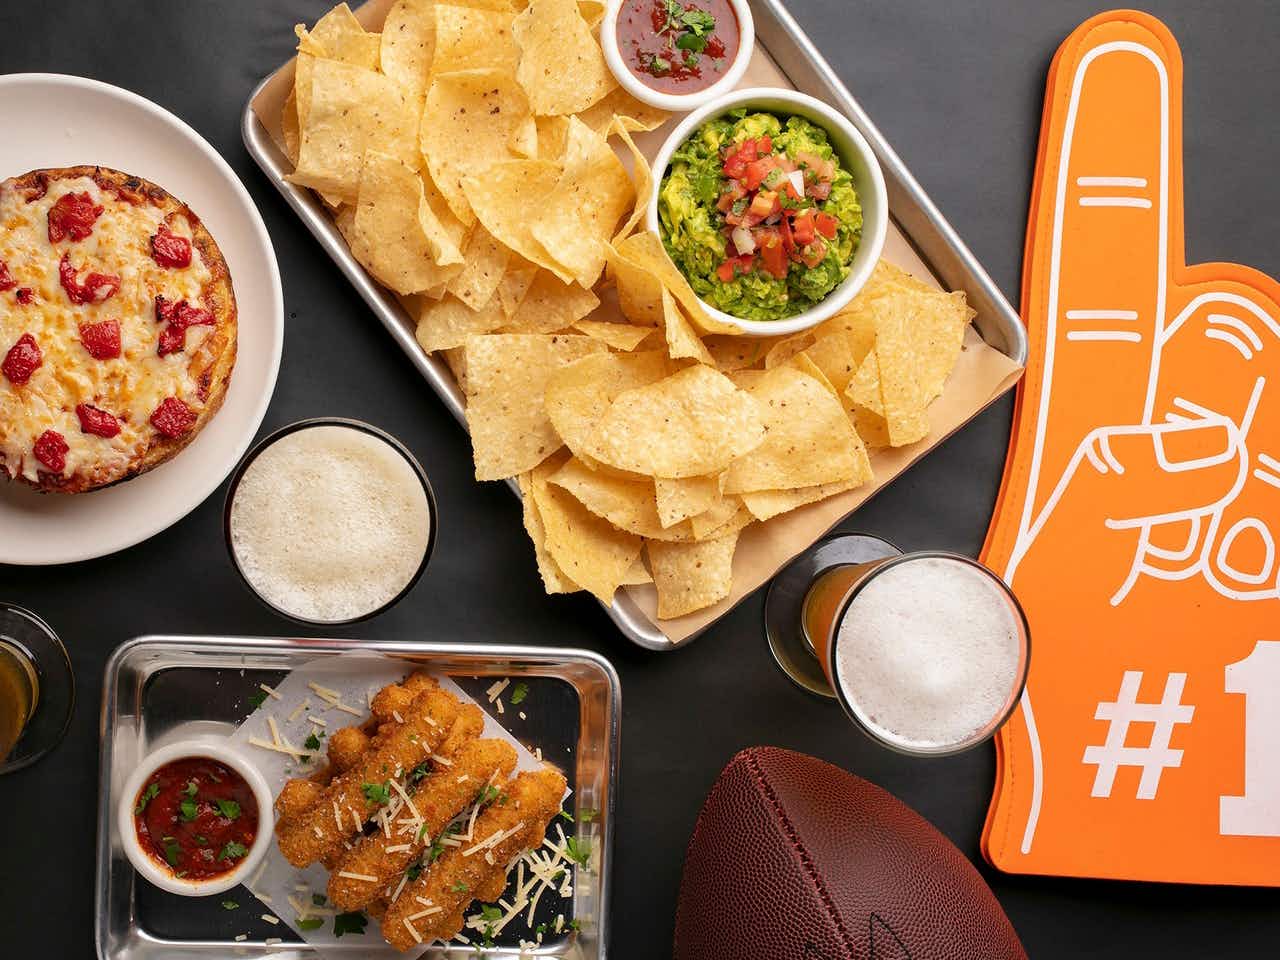 Chips, salsa, and other appetizers from BJ's restaurant